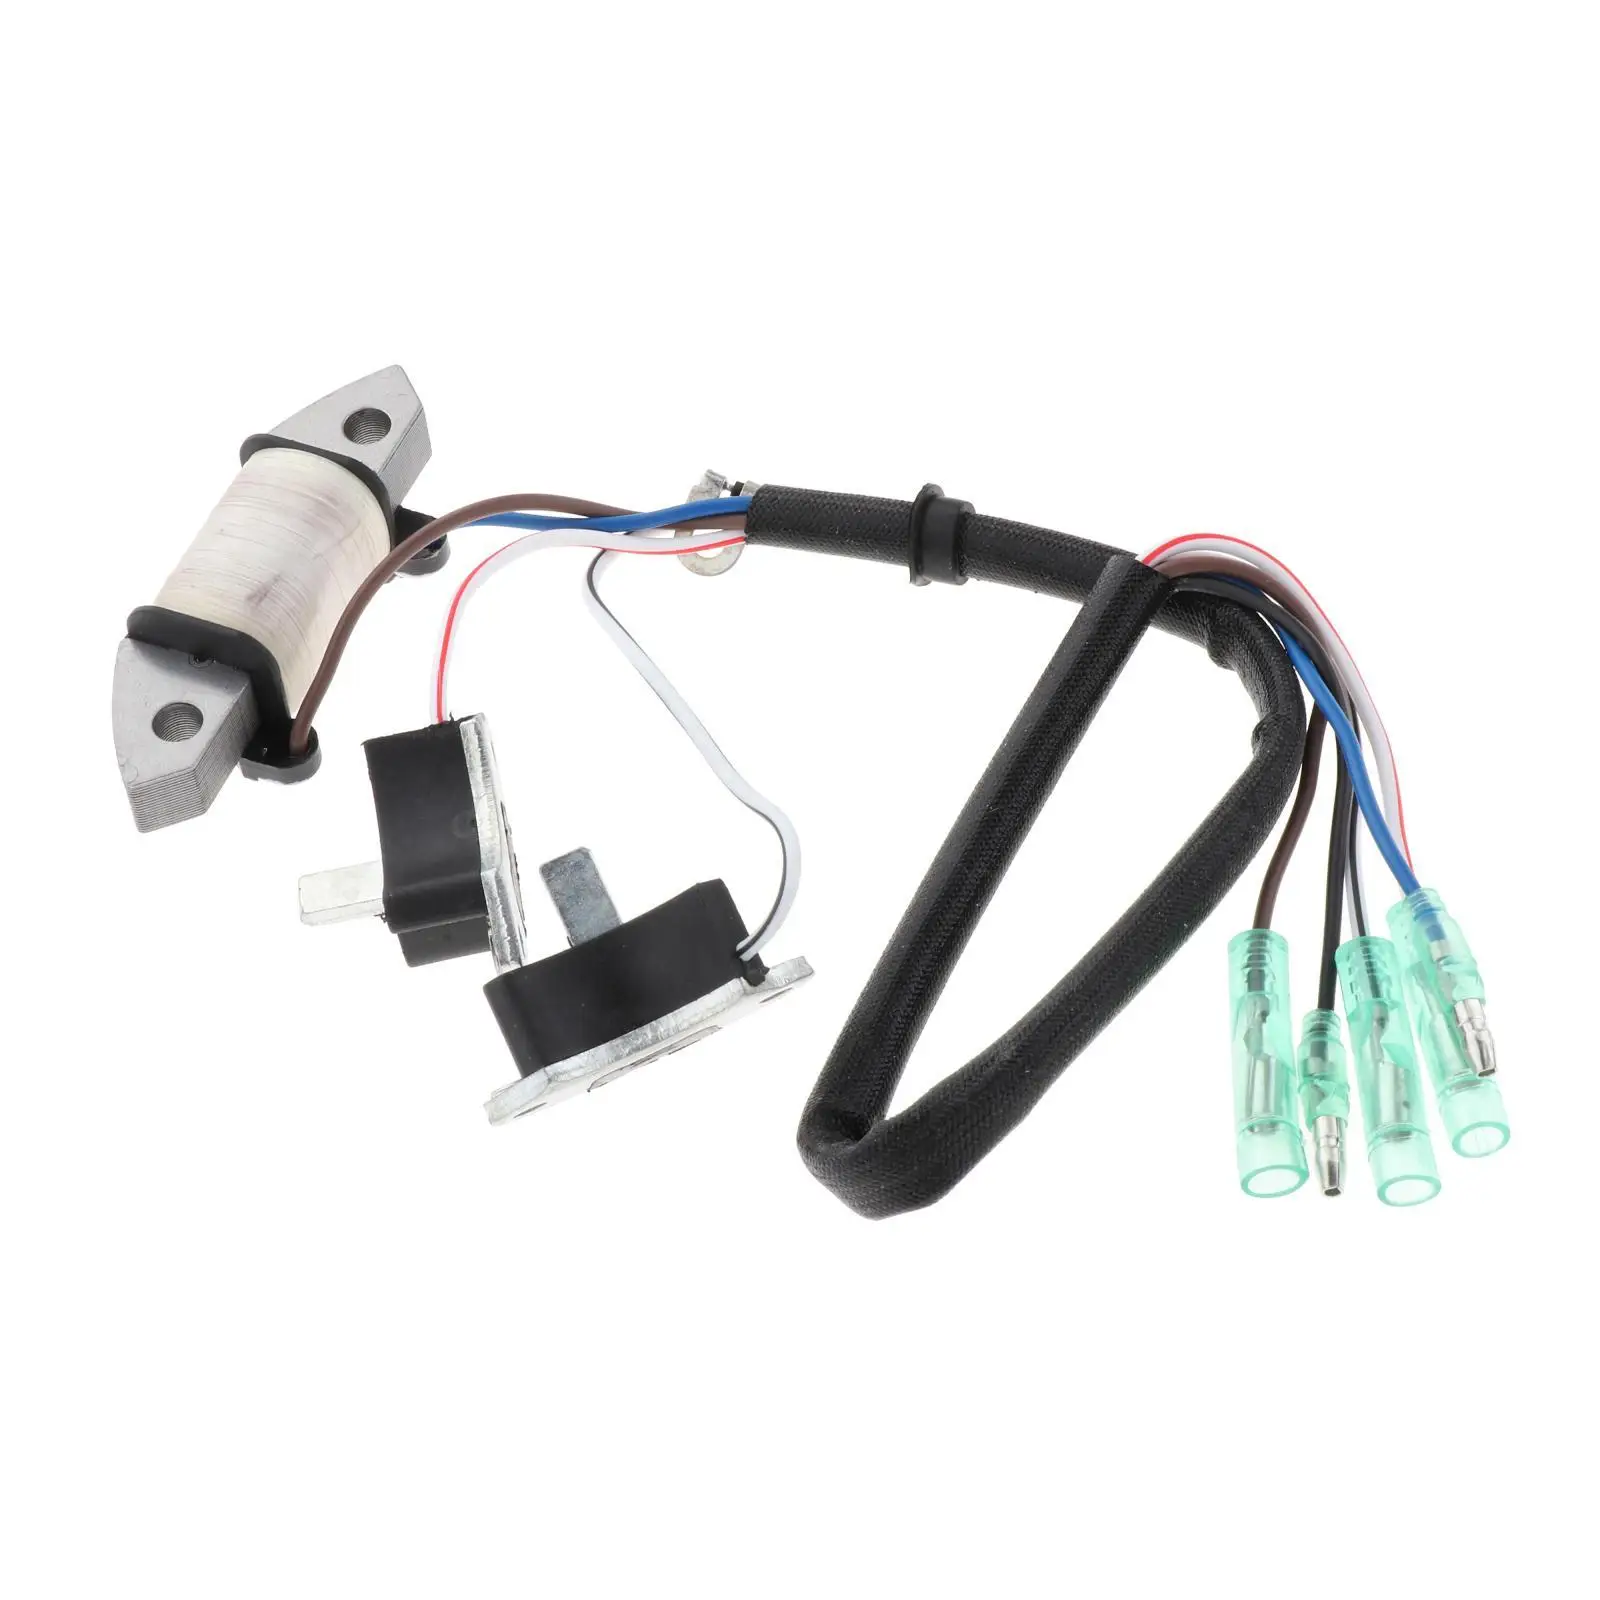 Charge Coil 61541-85541-85541 69P-85541-09 for  Outboard Motor 25 Stroke Direct replacement for the old or damaged ,